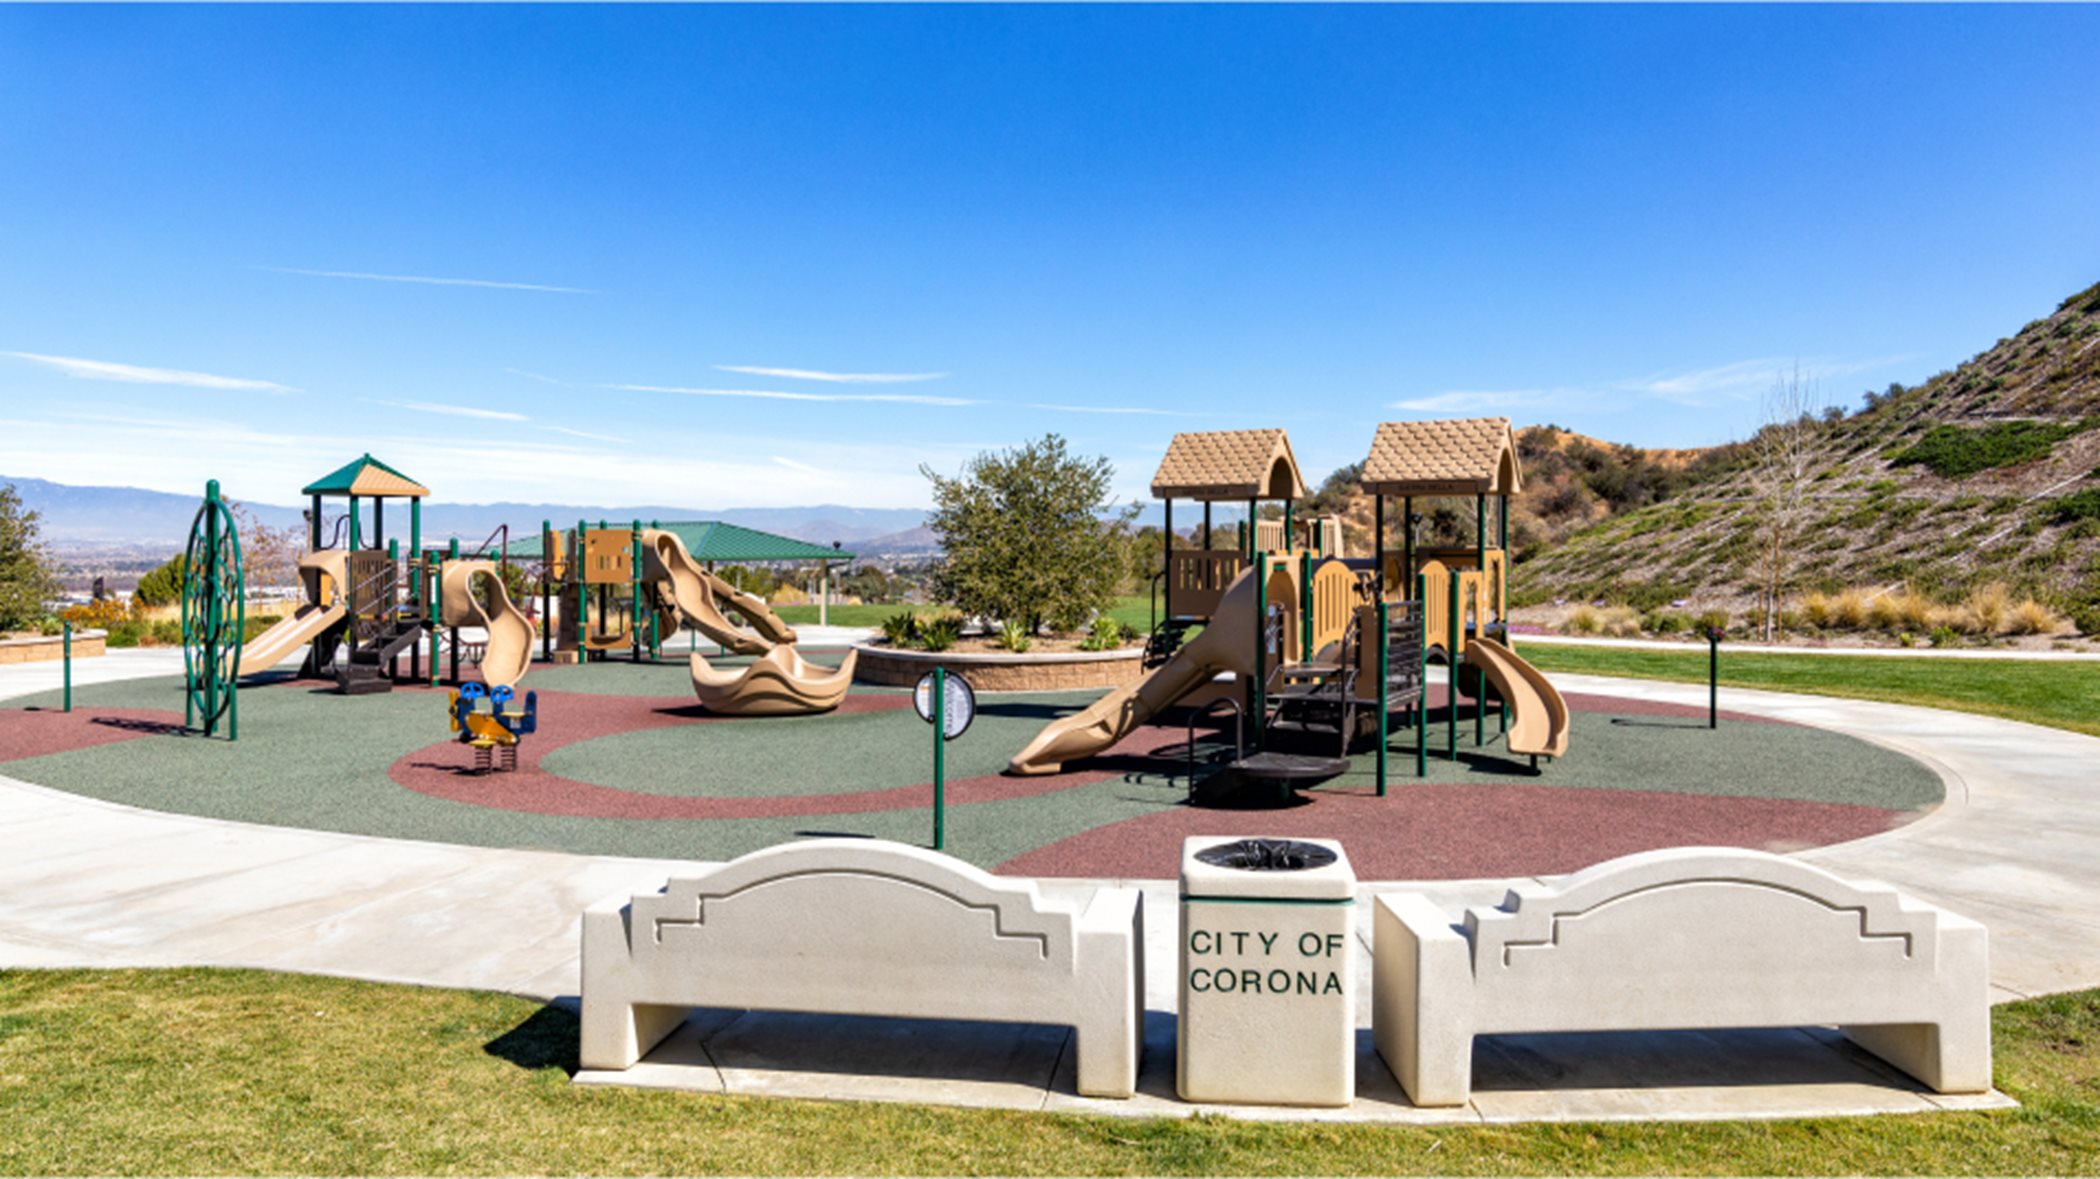 Playground and benches